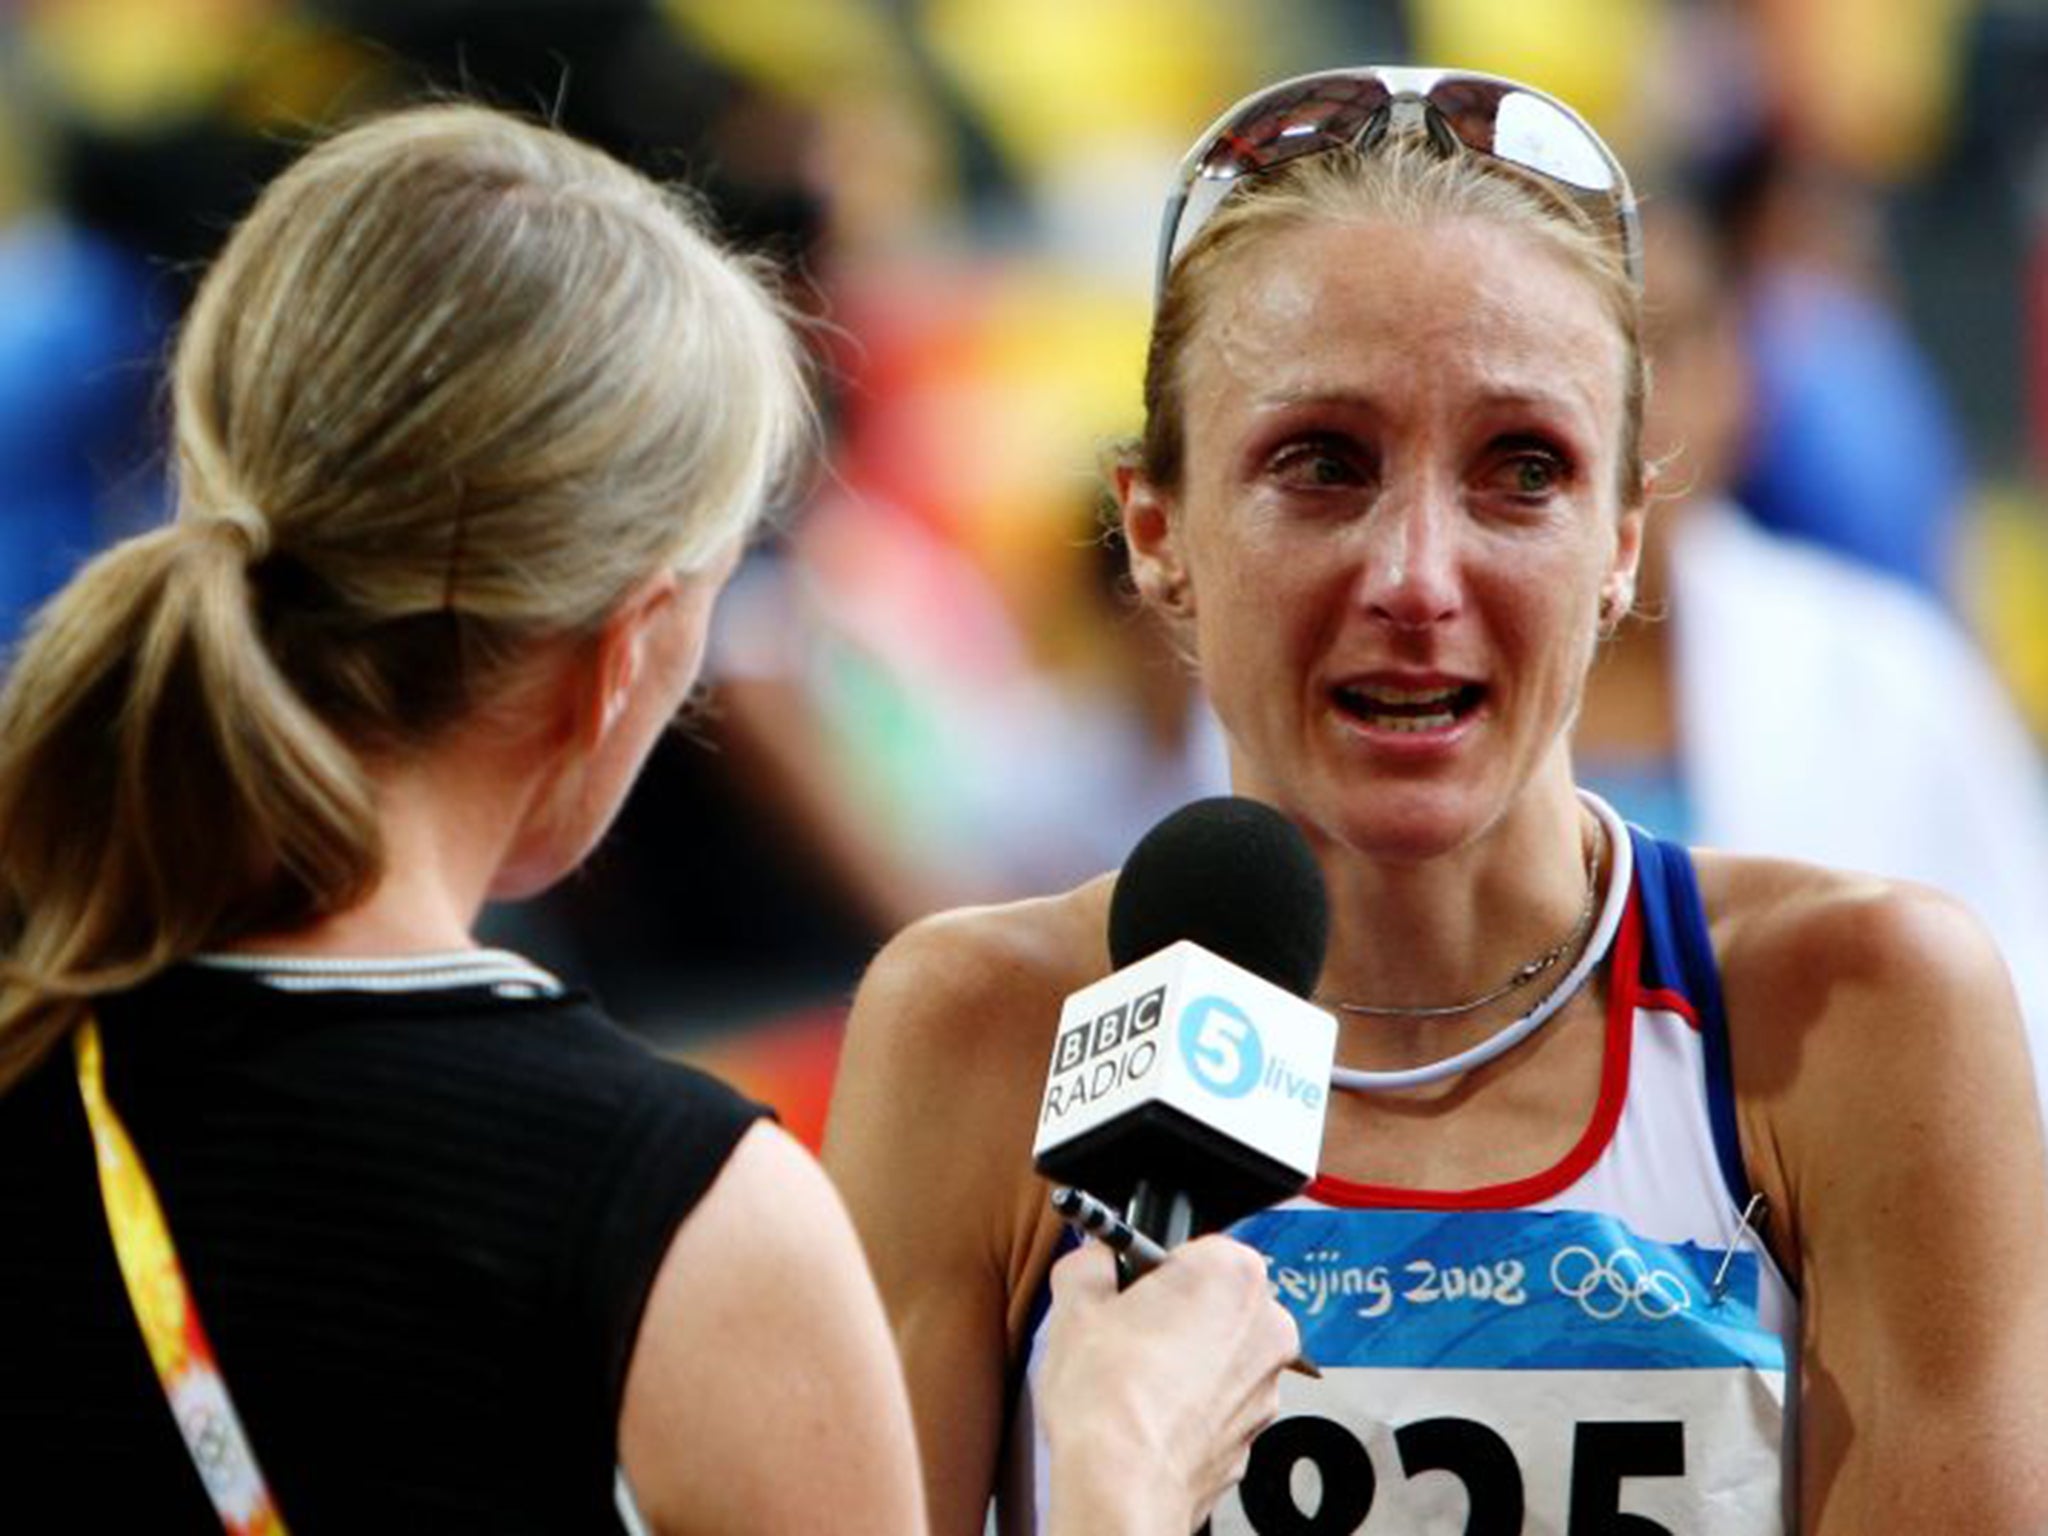 Paula Radcliffe being interviewed in tears after the women’s marathon at the 2008 Olympic Games in Beijing